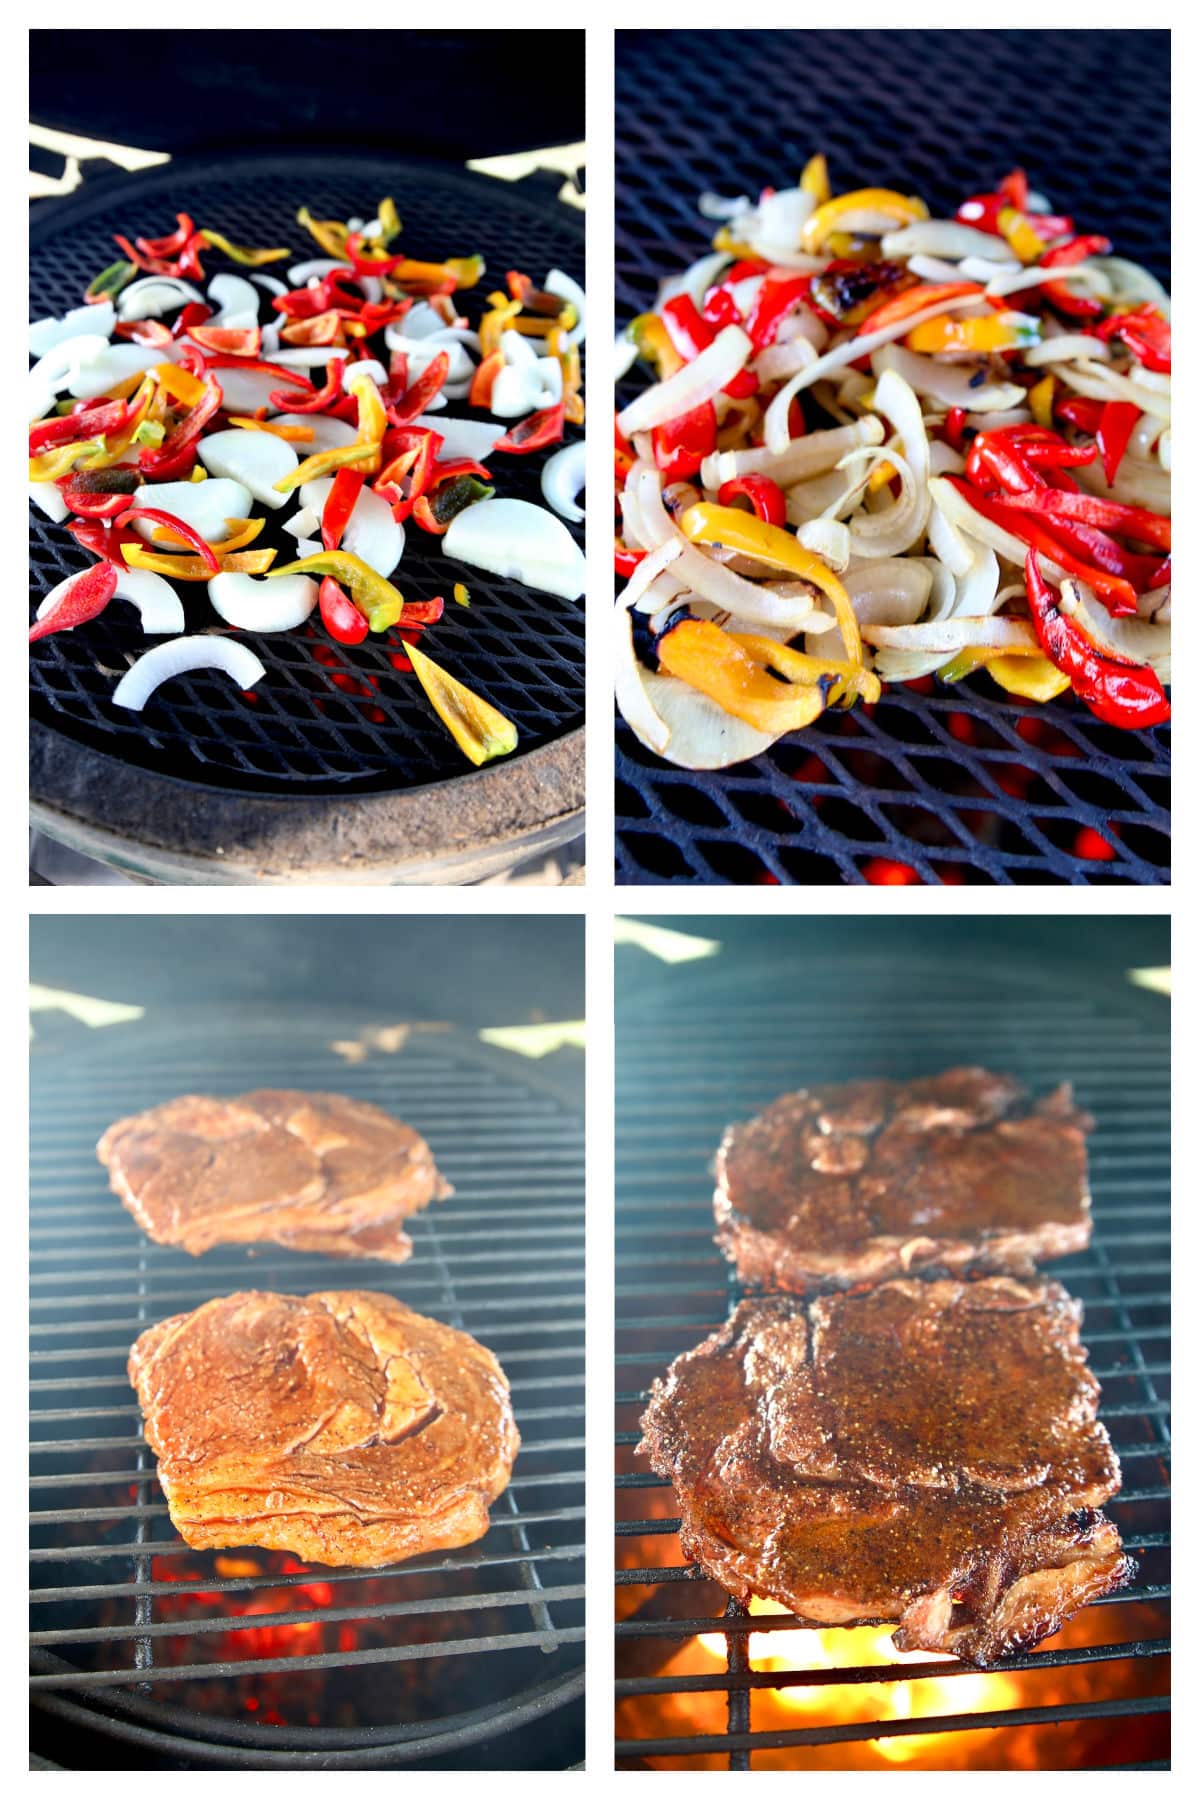 Collage: Grilling peppers, onions/ 2 ribeye steaks.